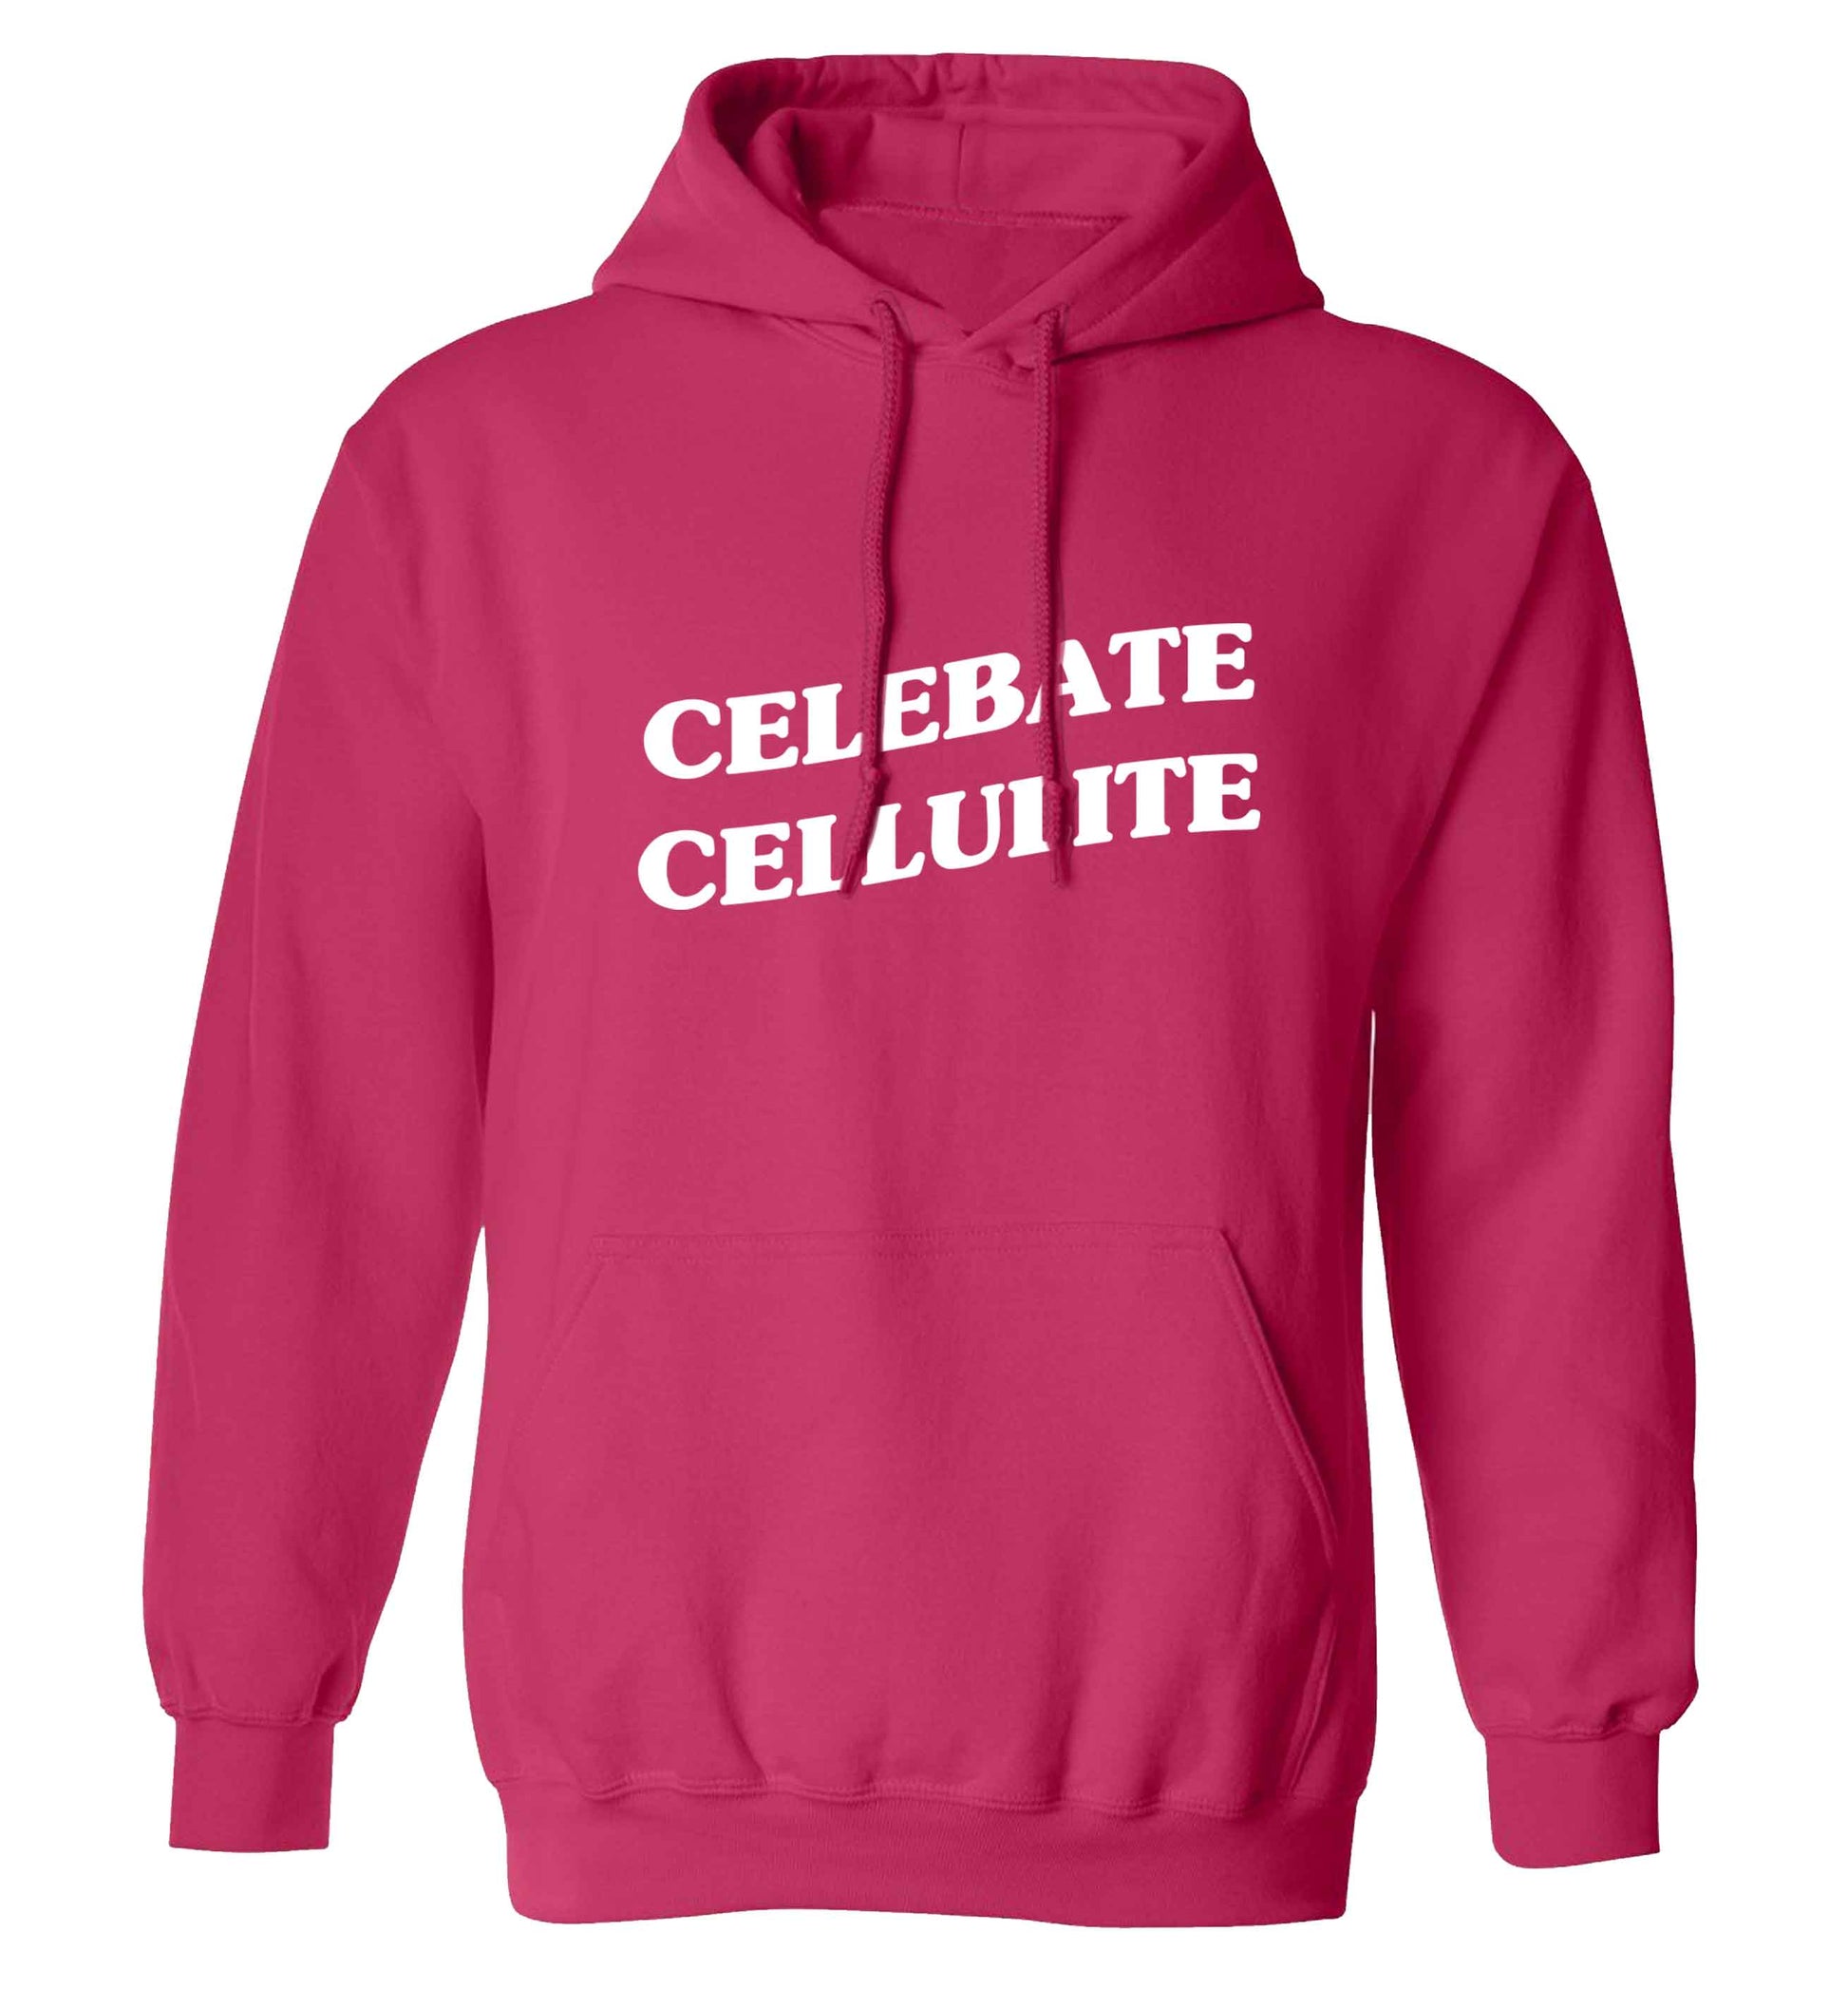 Celebrate cellulite adults unisex pink hoodie 2XL